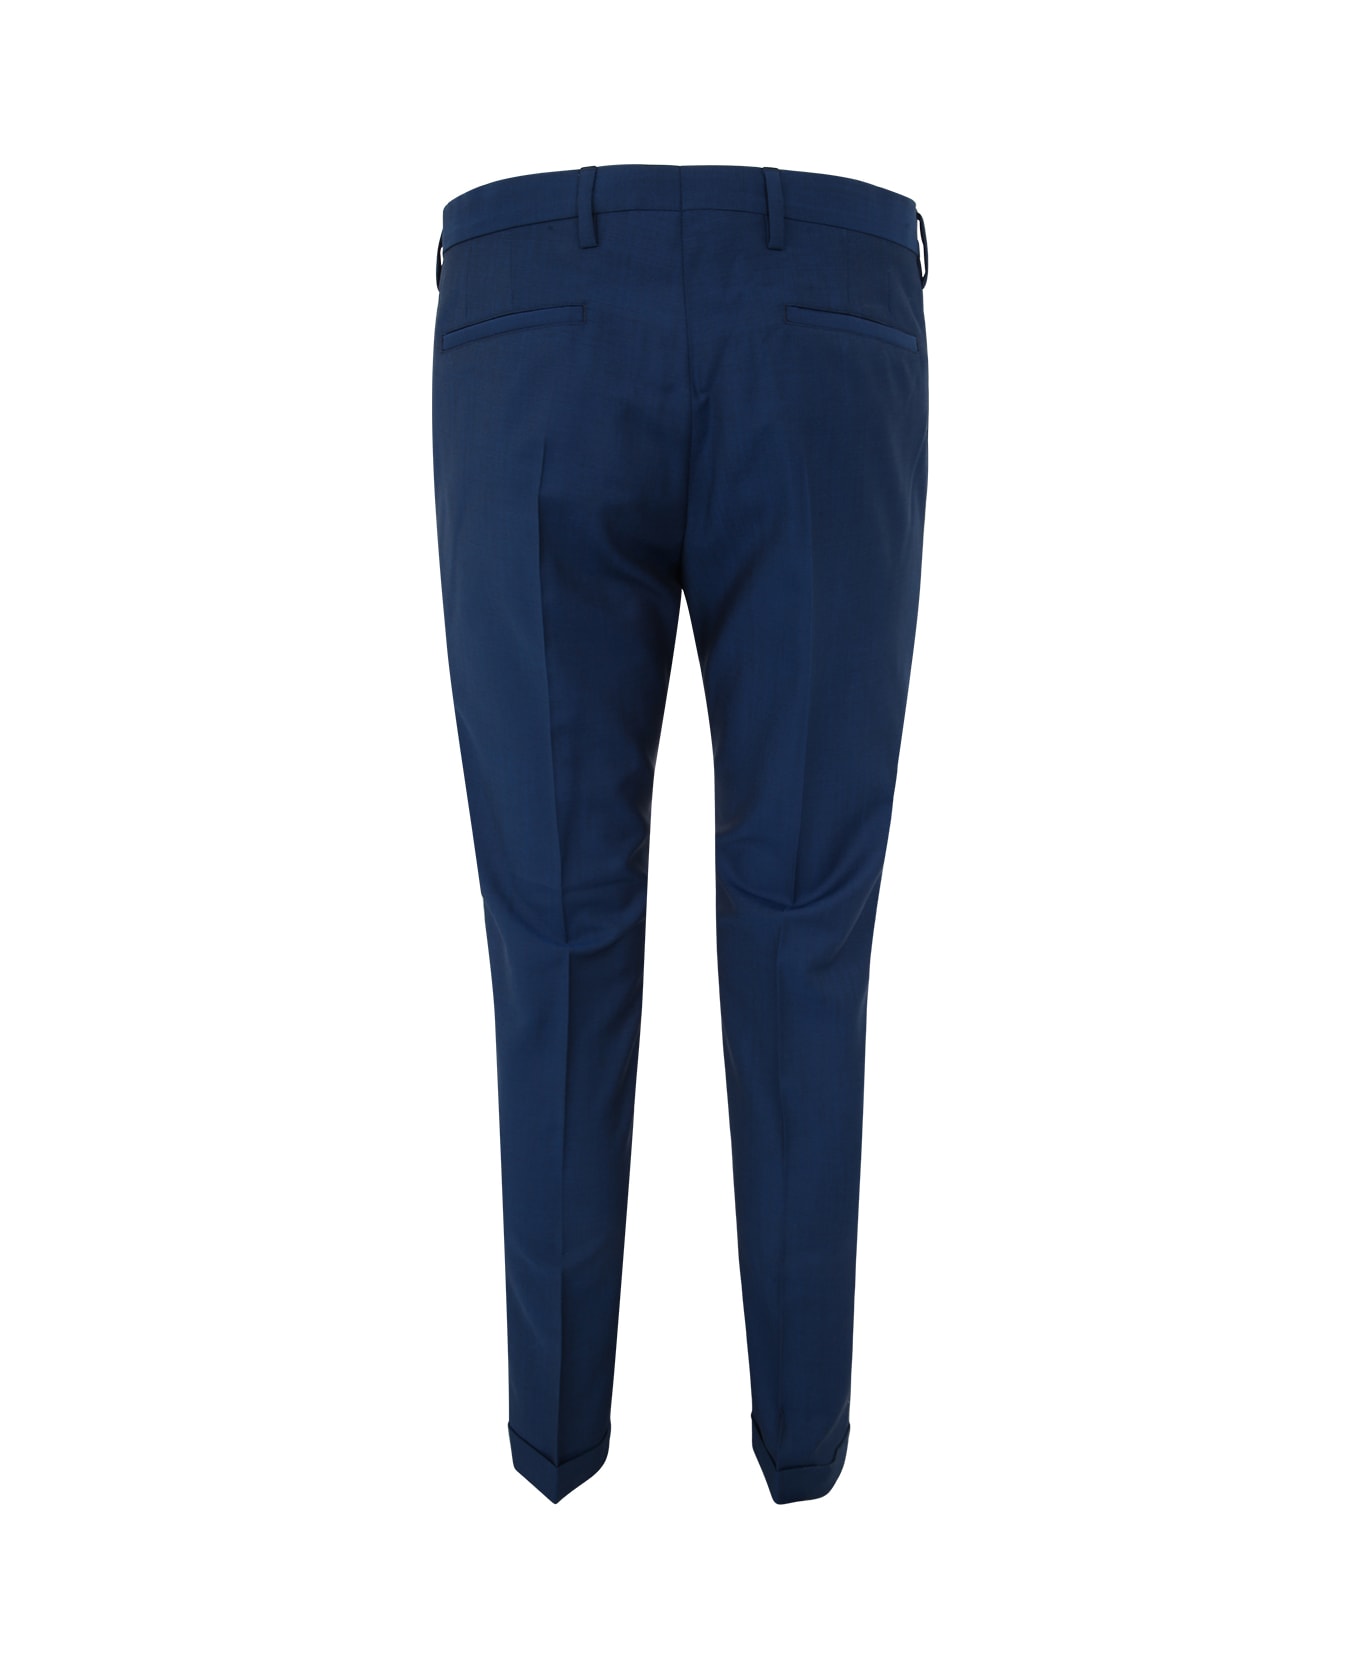 Paul Smith Mens Trousers - Blue